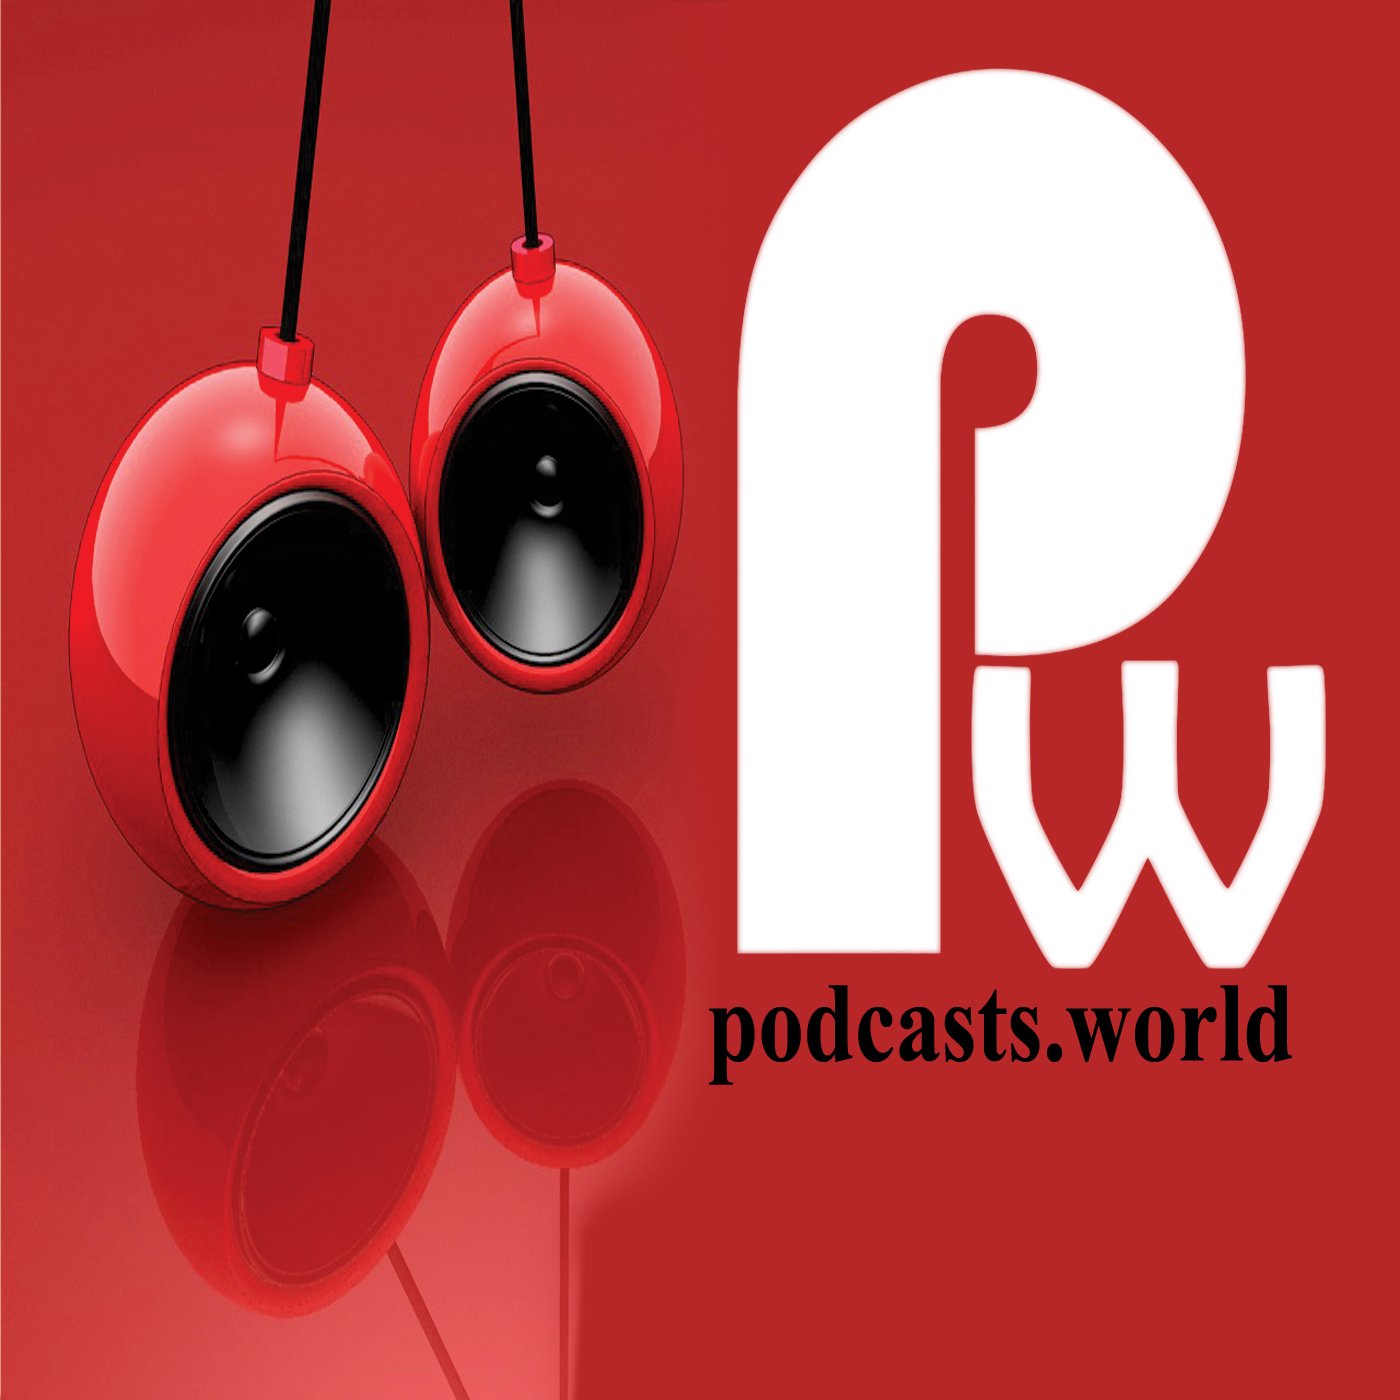 We Provide #AudioPodcasts and #videos of Political TV Talk Shows from Pakistan, For Feedback  u can DM or email us on info@podcasts.world